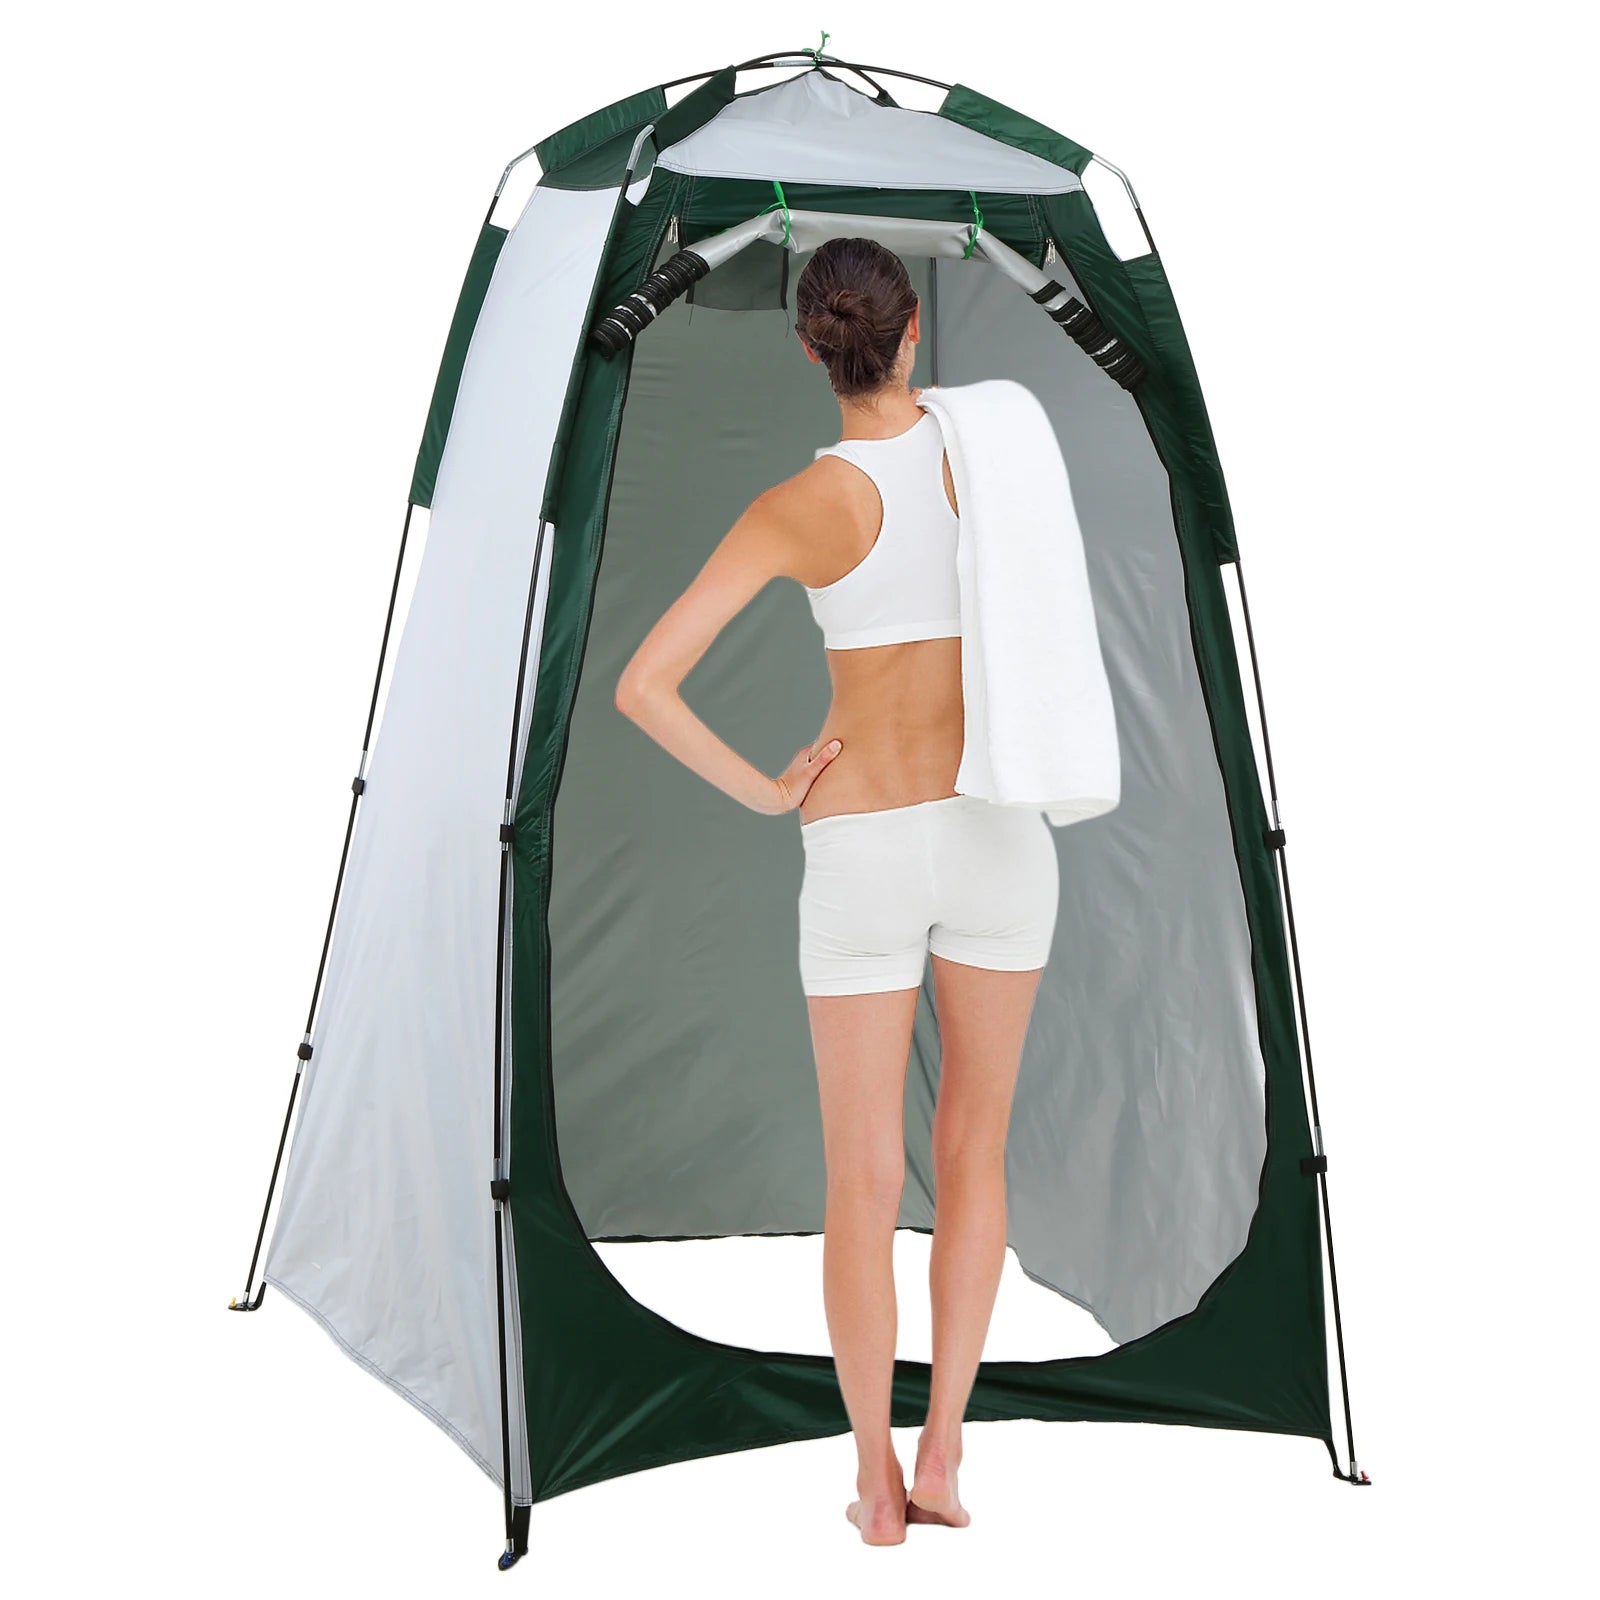 Portable Shower Toilet Changing Tent Sun Rain Shelter Privacy Shelter Tent with Window for Outdoor Camping Beach Bathroom